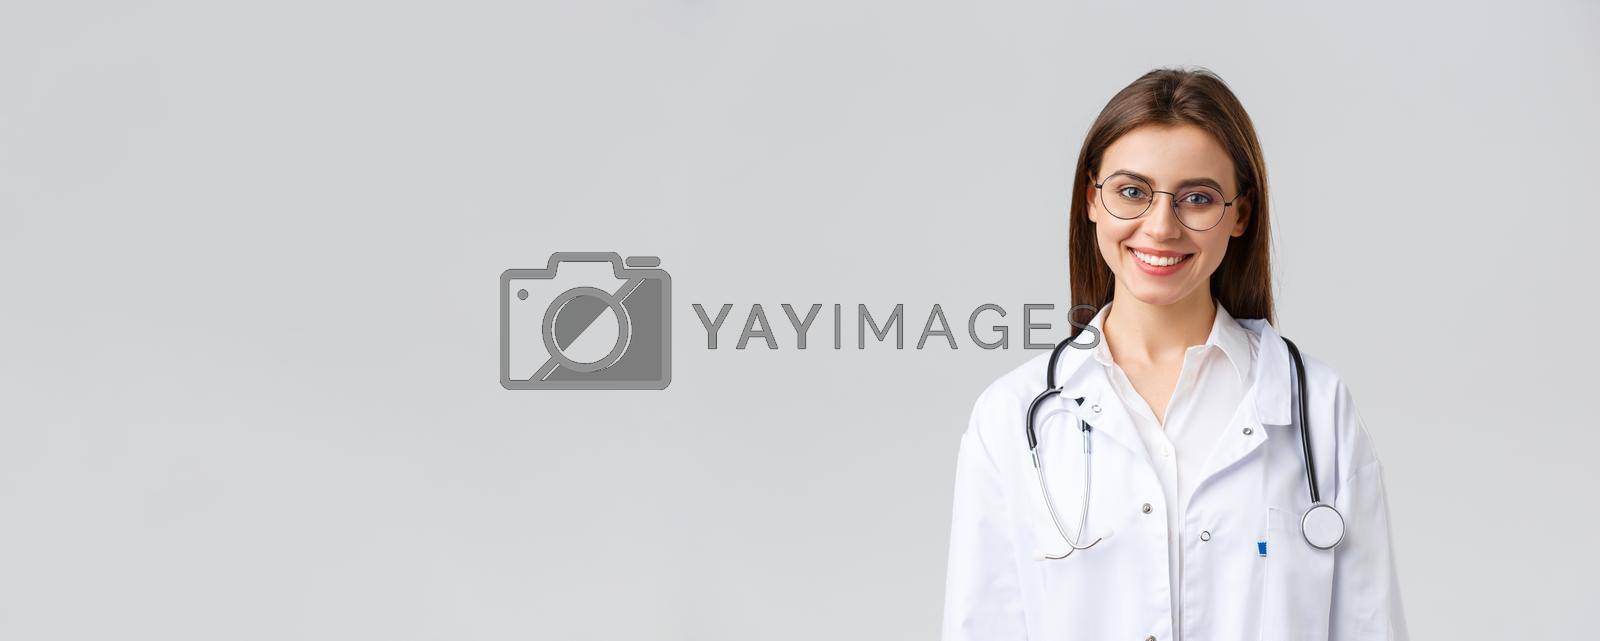 Healthcare workers, medicine, insurance and covid-19 pandemic concept. Smiling attractive female doctor, physician in white scrubs with stethoscope and glasses look upbeat at camera.